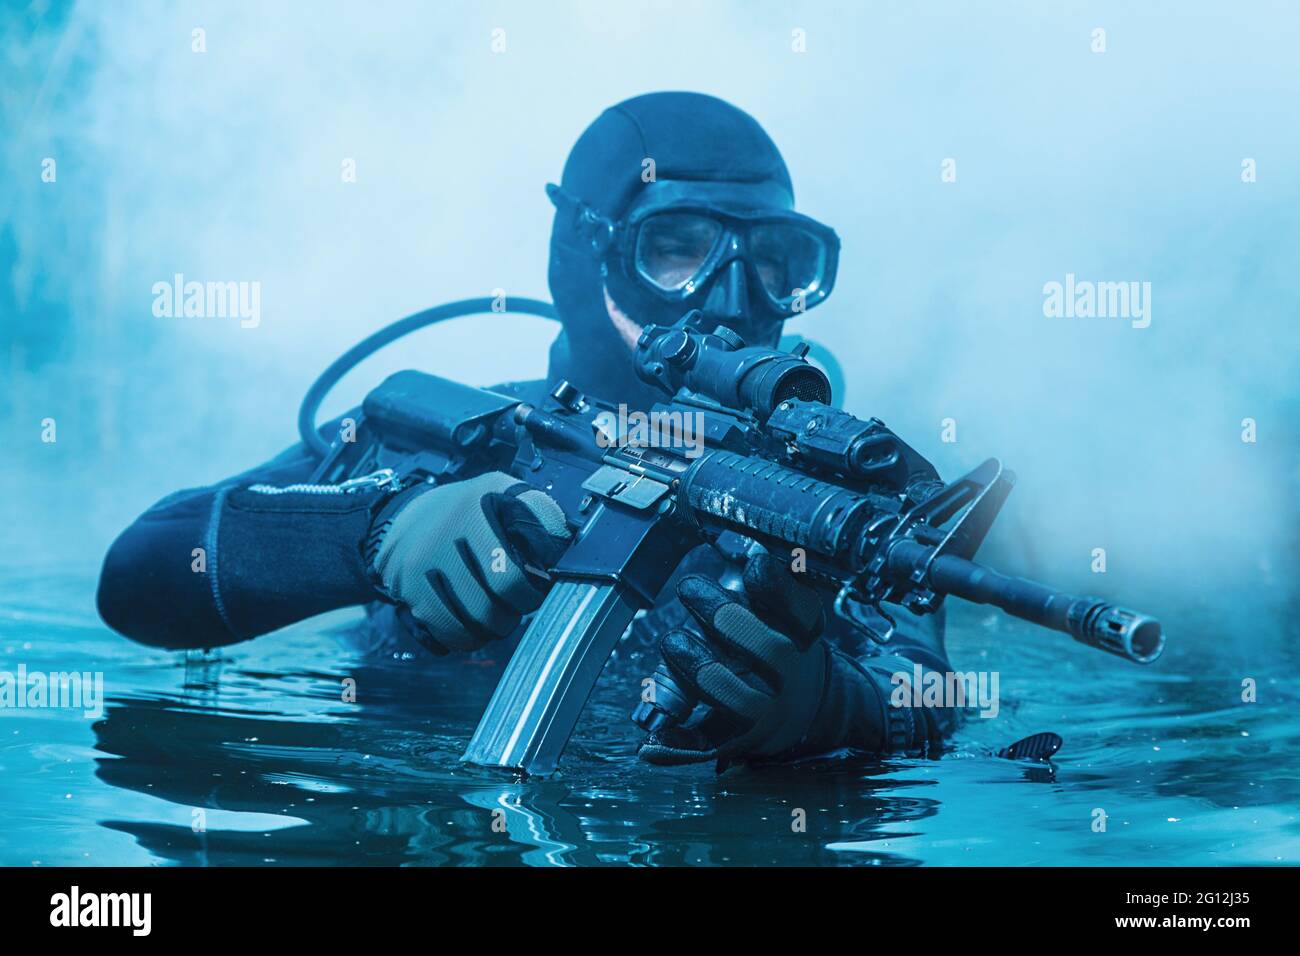 Frogman with complete diving gear and weapons in the water. Stock Photo